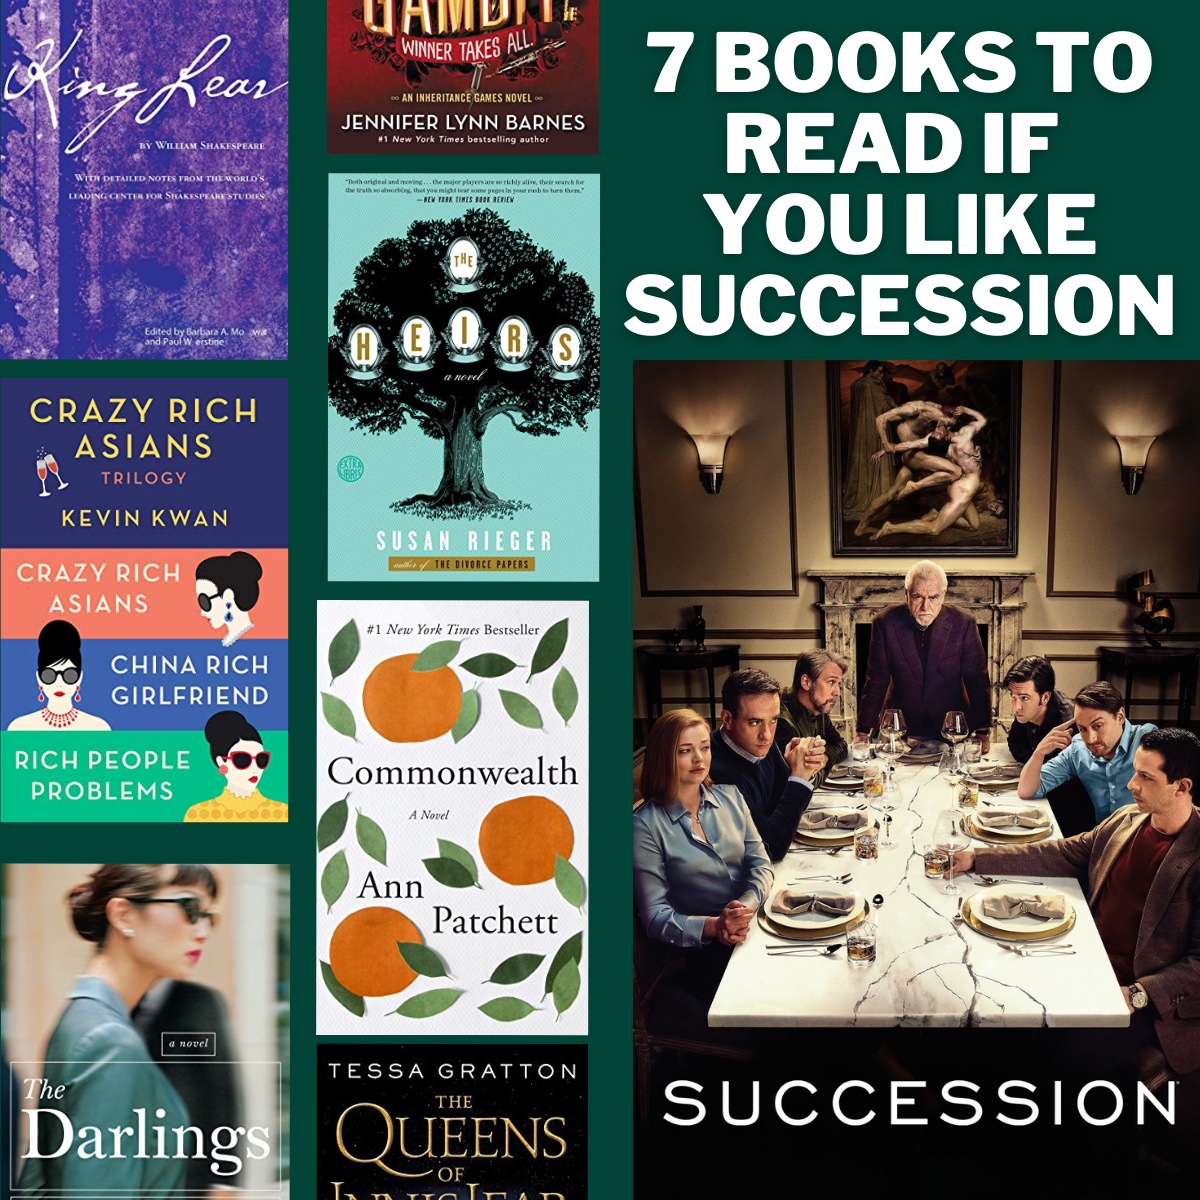 7 Books to Read If You Like Succession